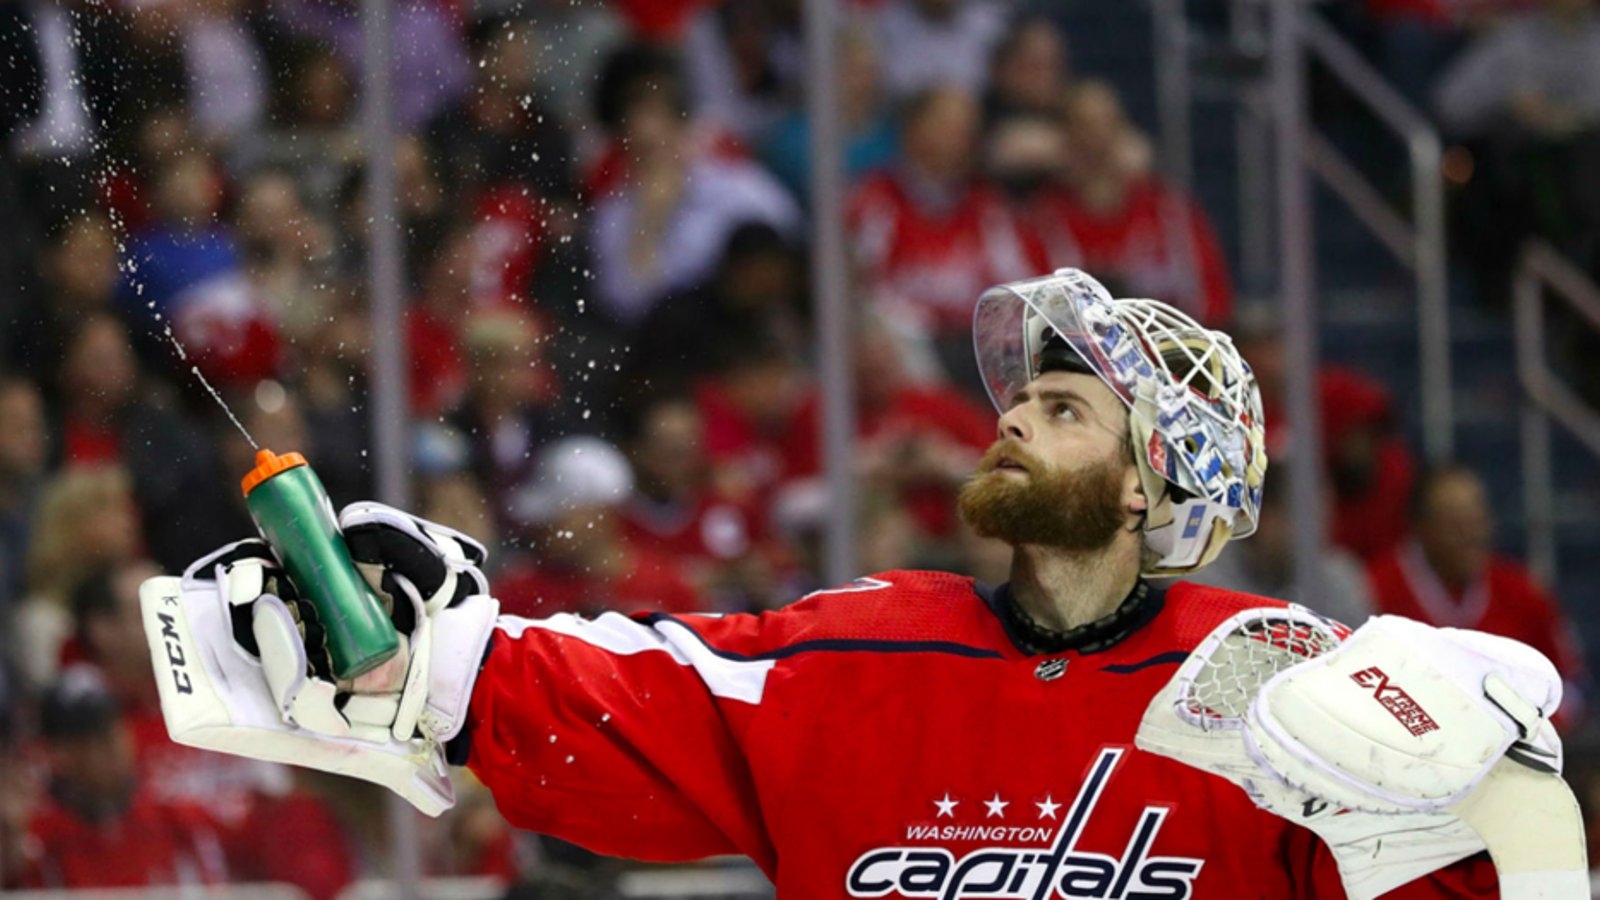 Capitals GM confirms Braden Holtby will not be back